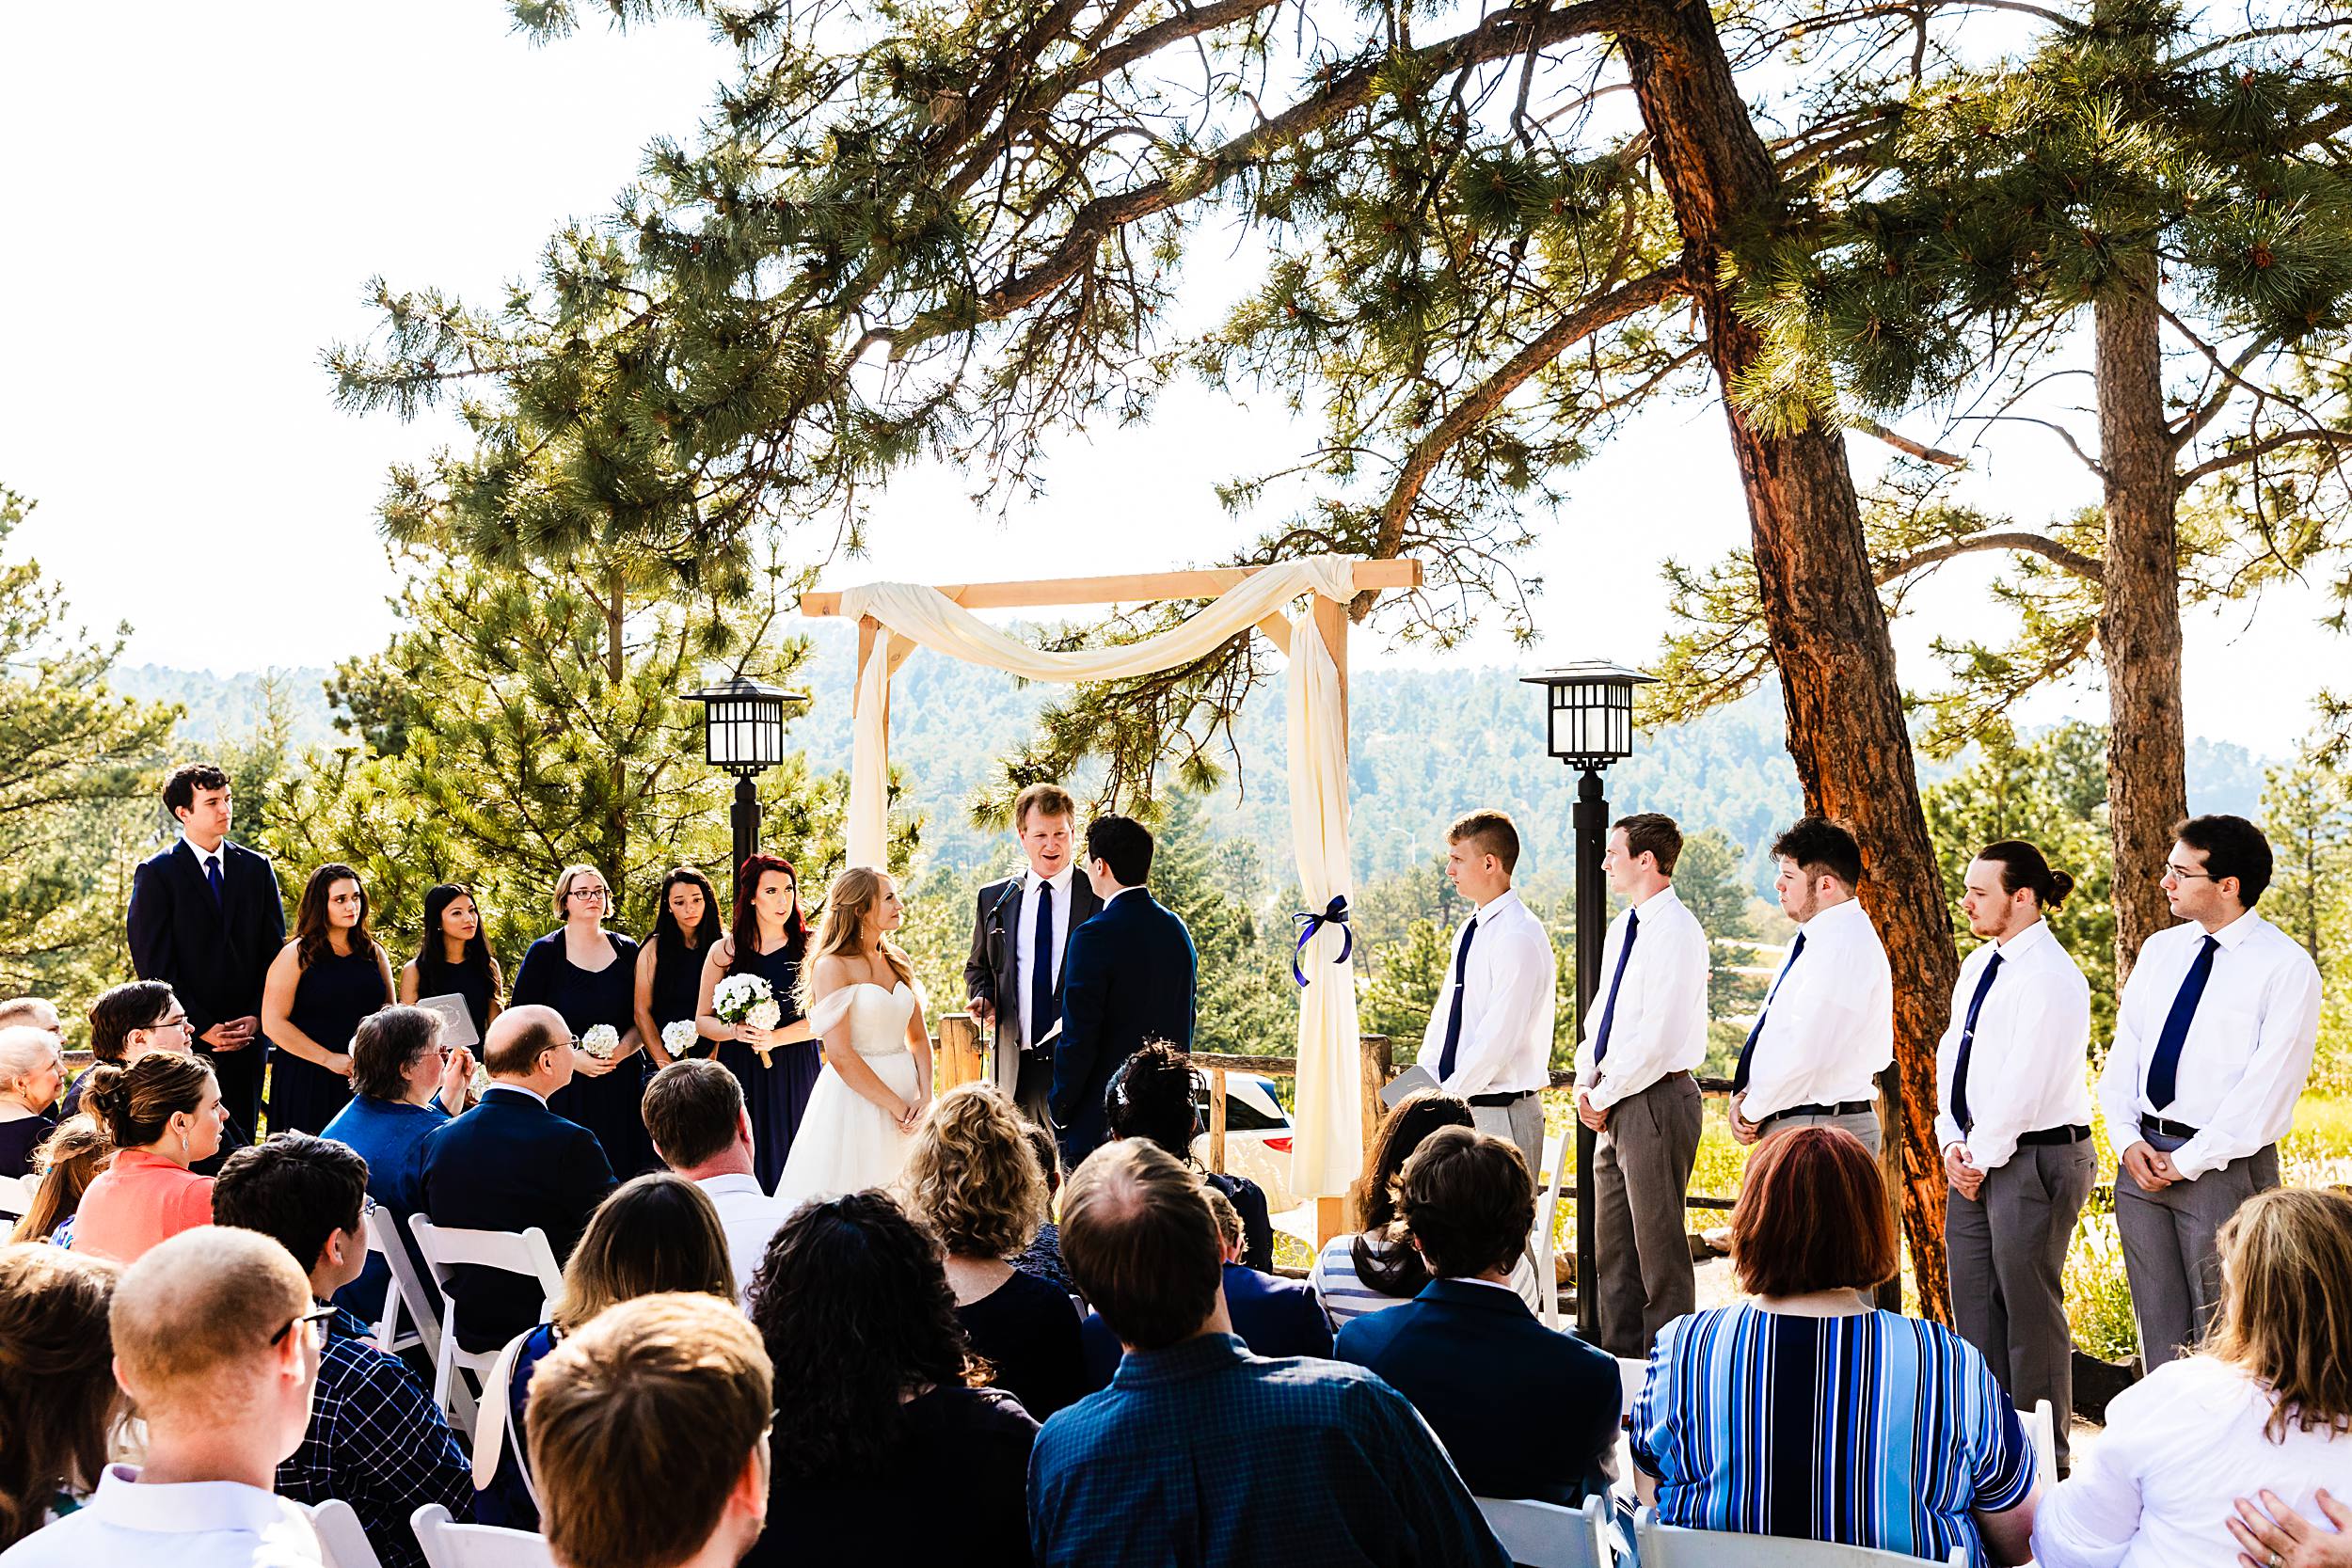 Chief Hosa Lodge offers a gorgeous outdoor wedding ceremony location